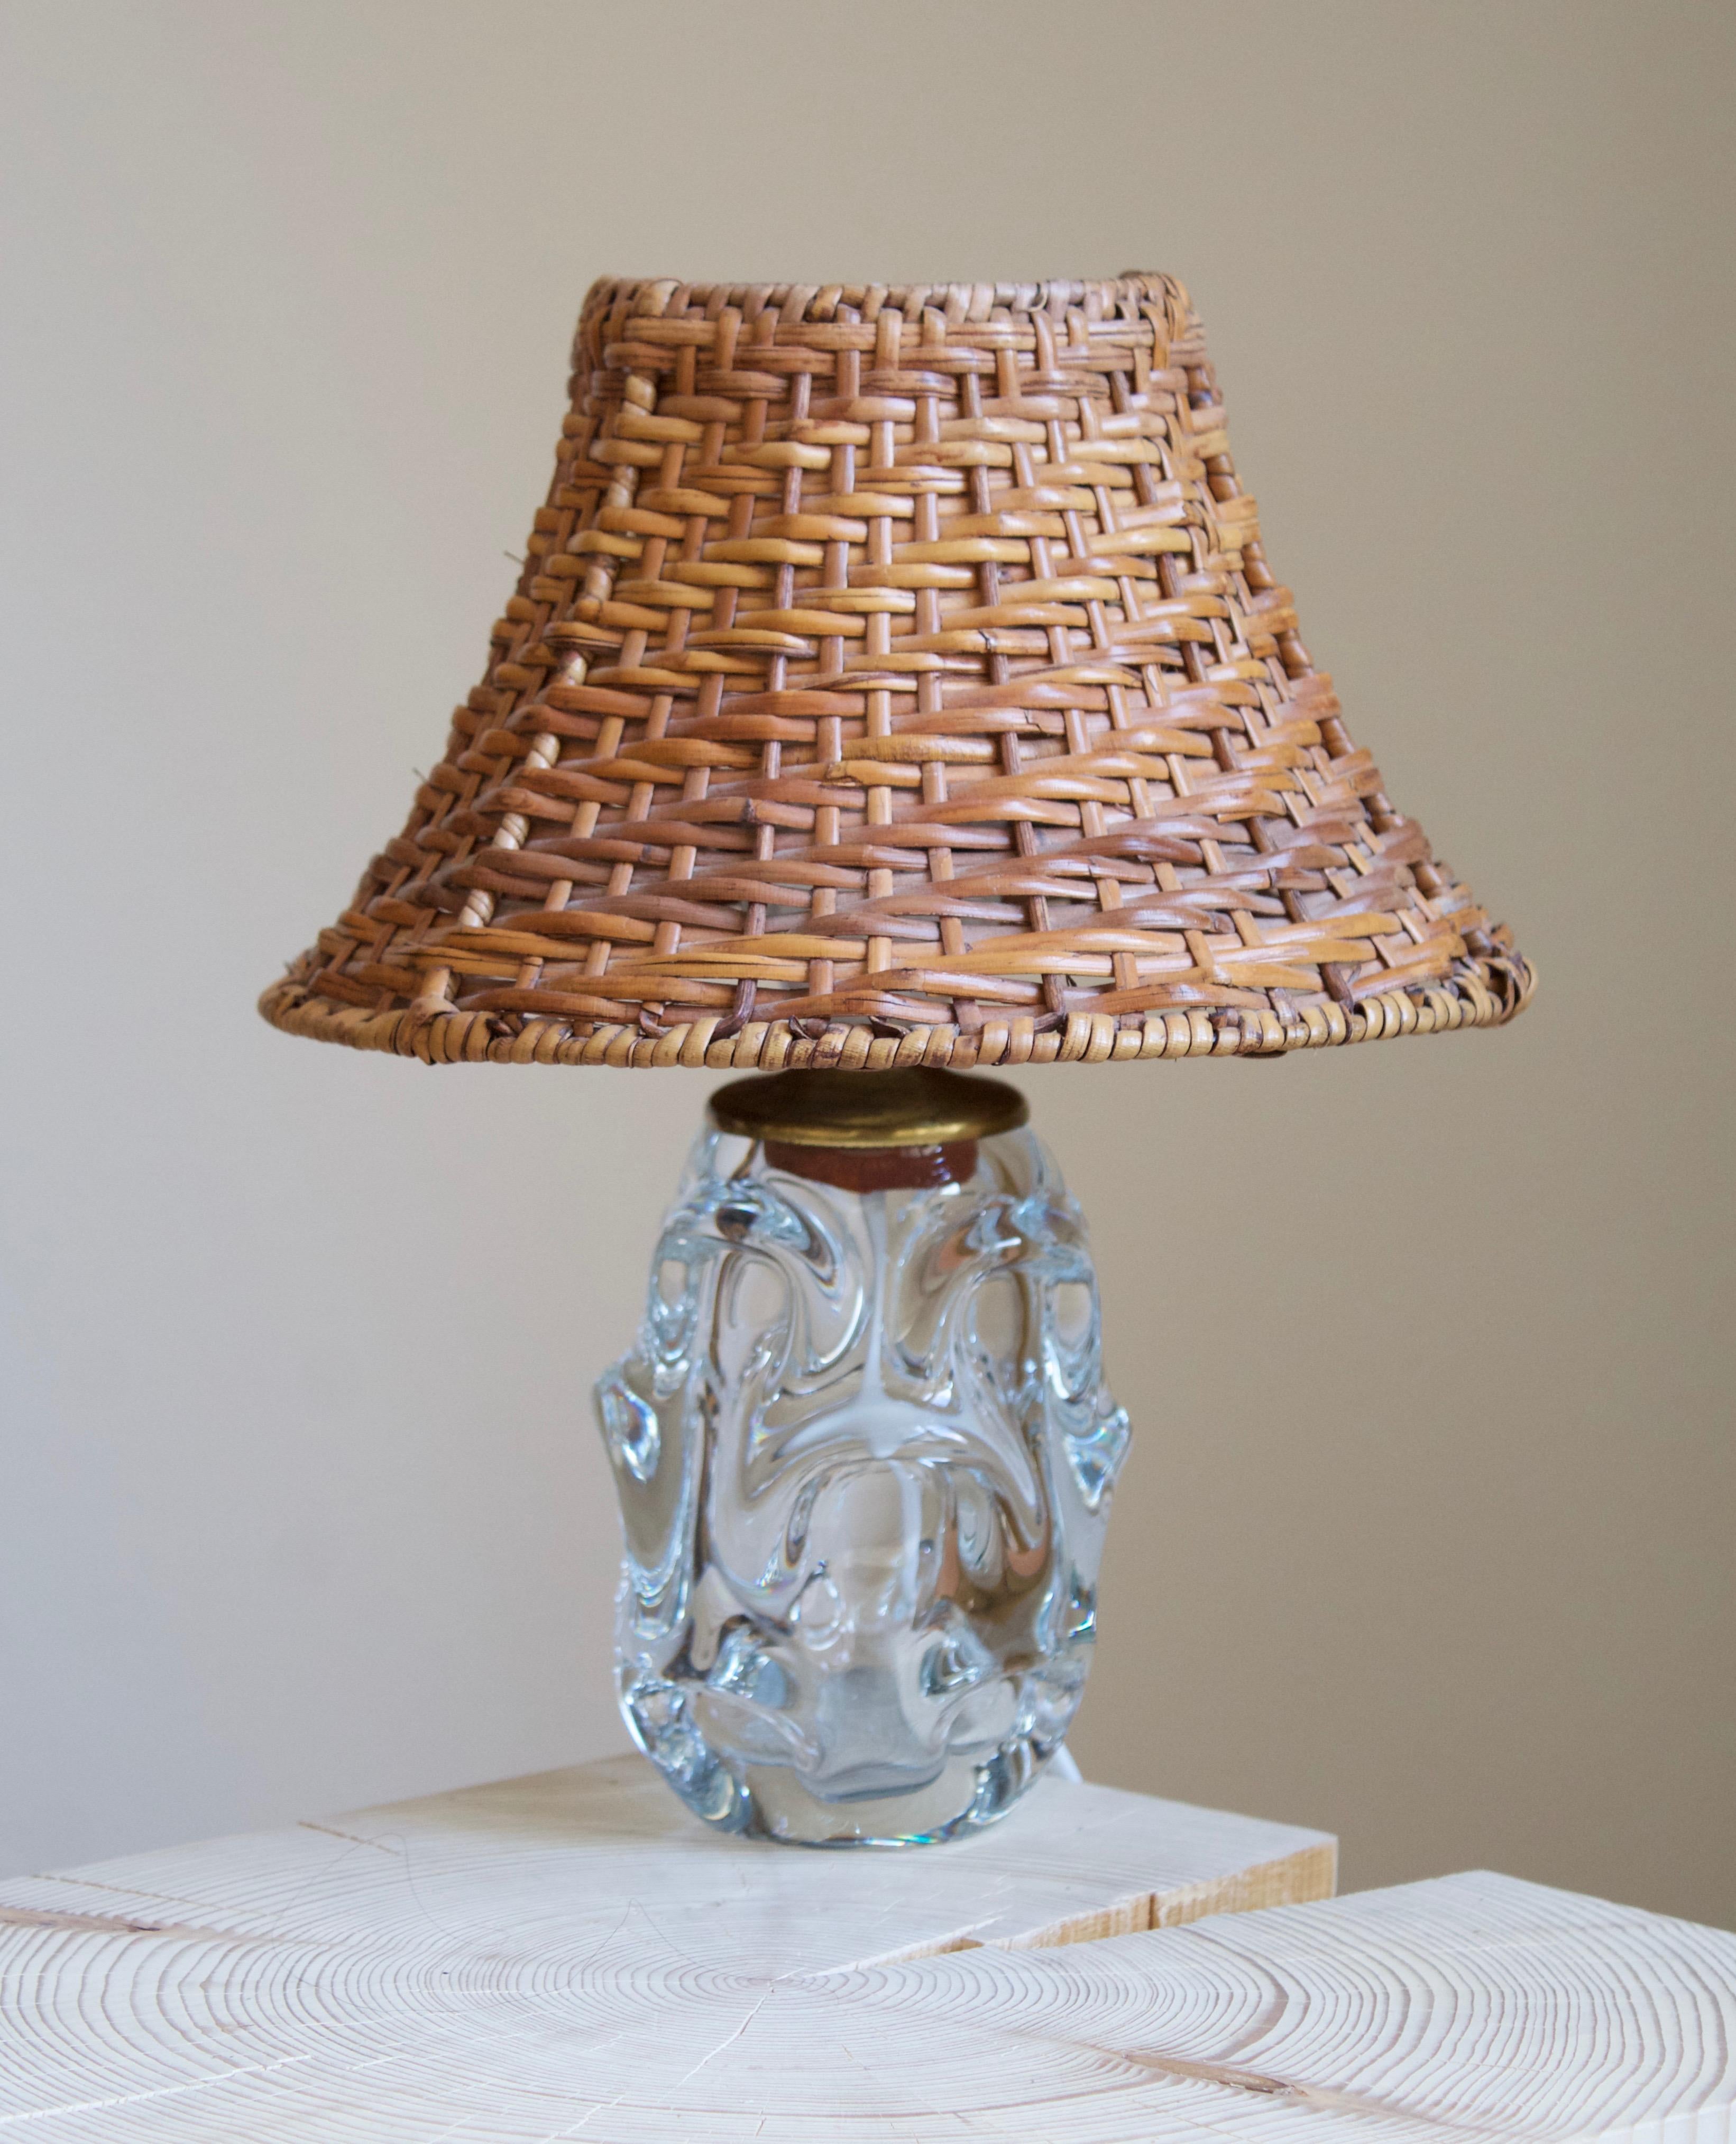 A modernist organic table lamp. Of Swedish production, produced by Reijmyre Glasbruk. In blown glass, 1950s. 

Dimensions stated excludes lampshade. Upon request a vintage rattan lampshade of model illustrated can be included in the